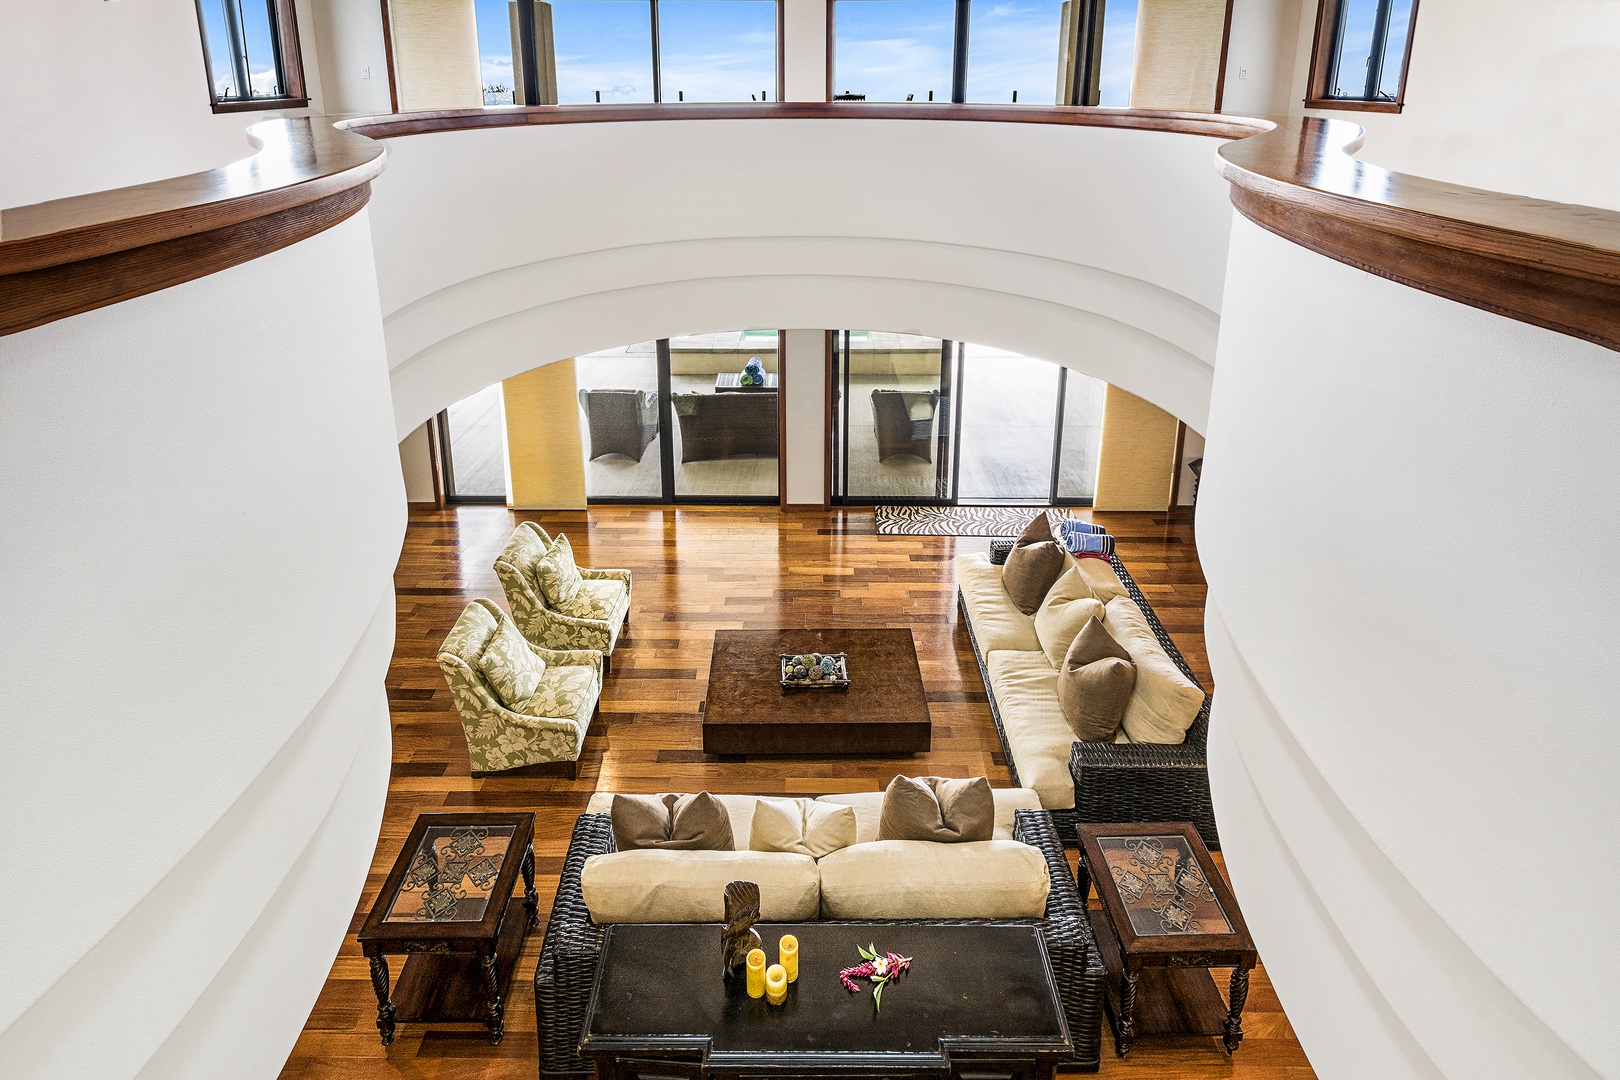 Kailua Kona Vacation Rentals, O'oma Plantation - Looking down from the upstairs to the spacious living room!